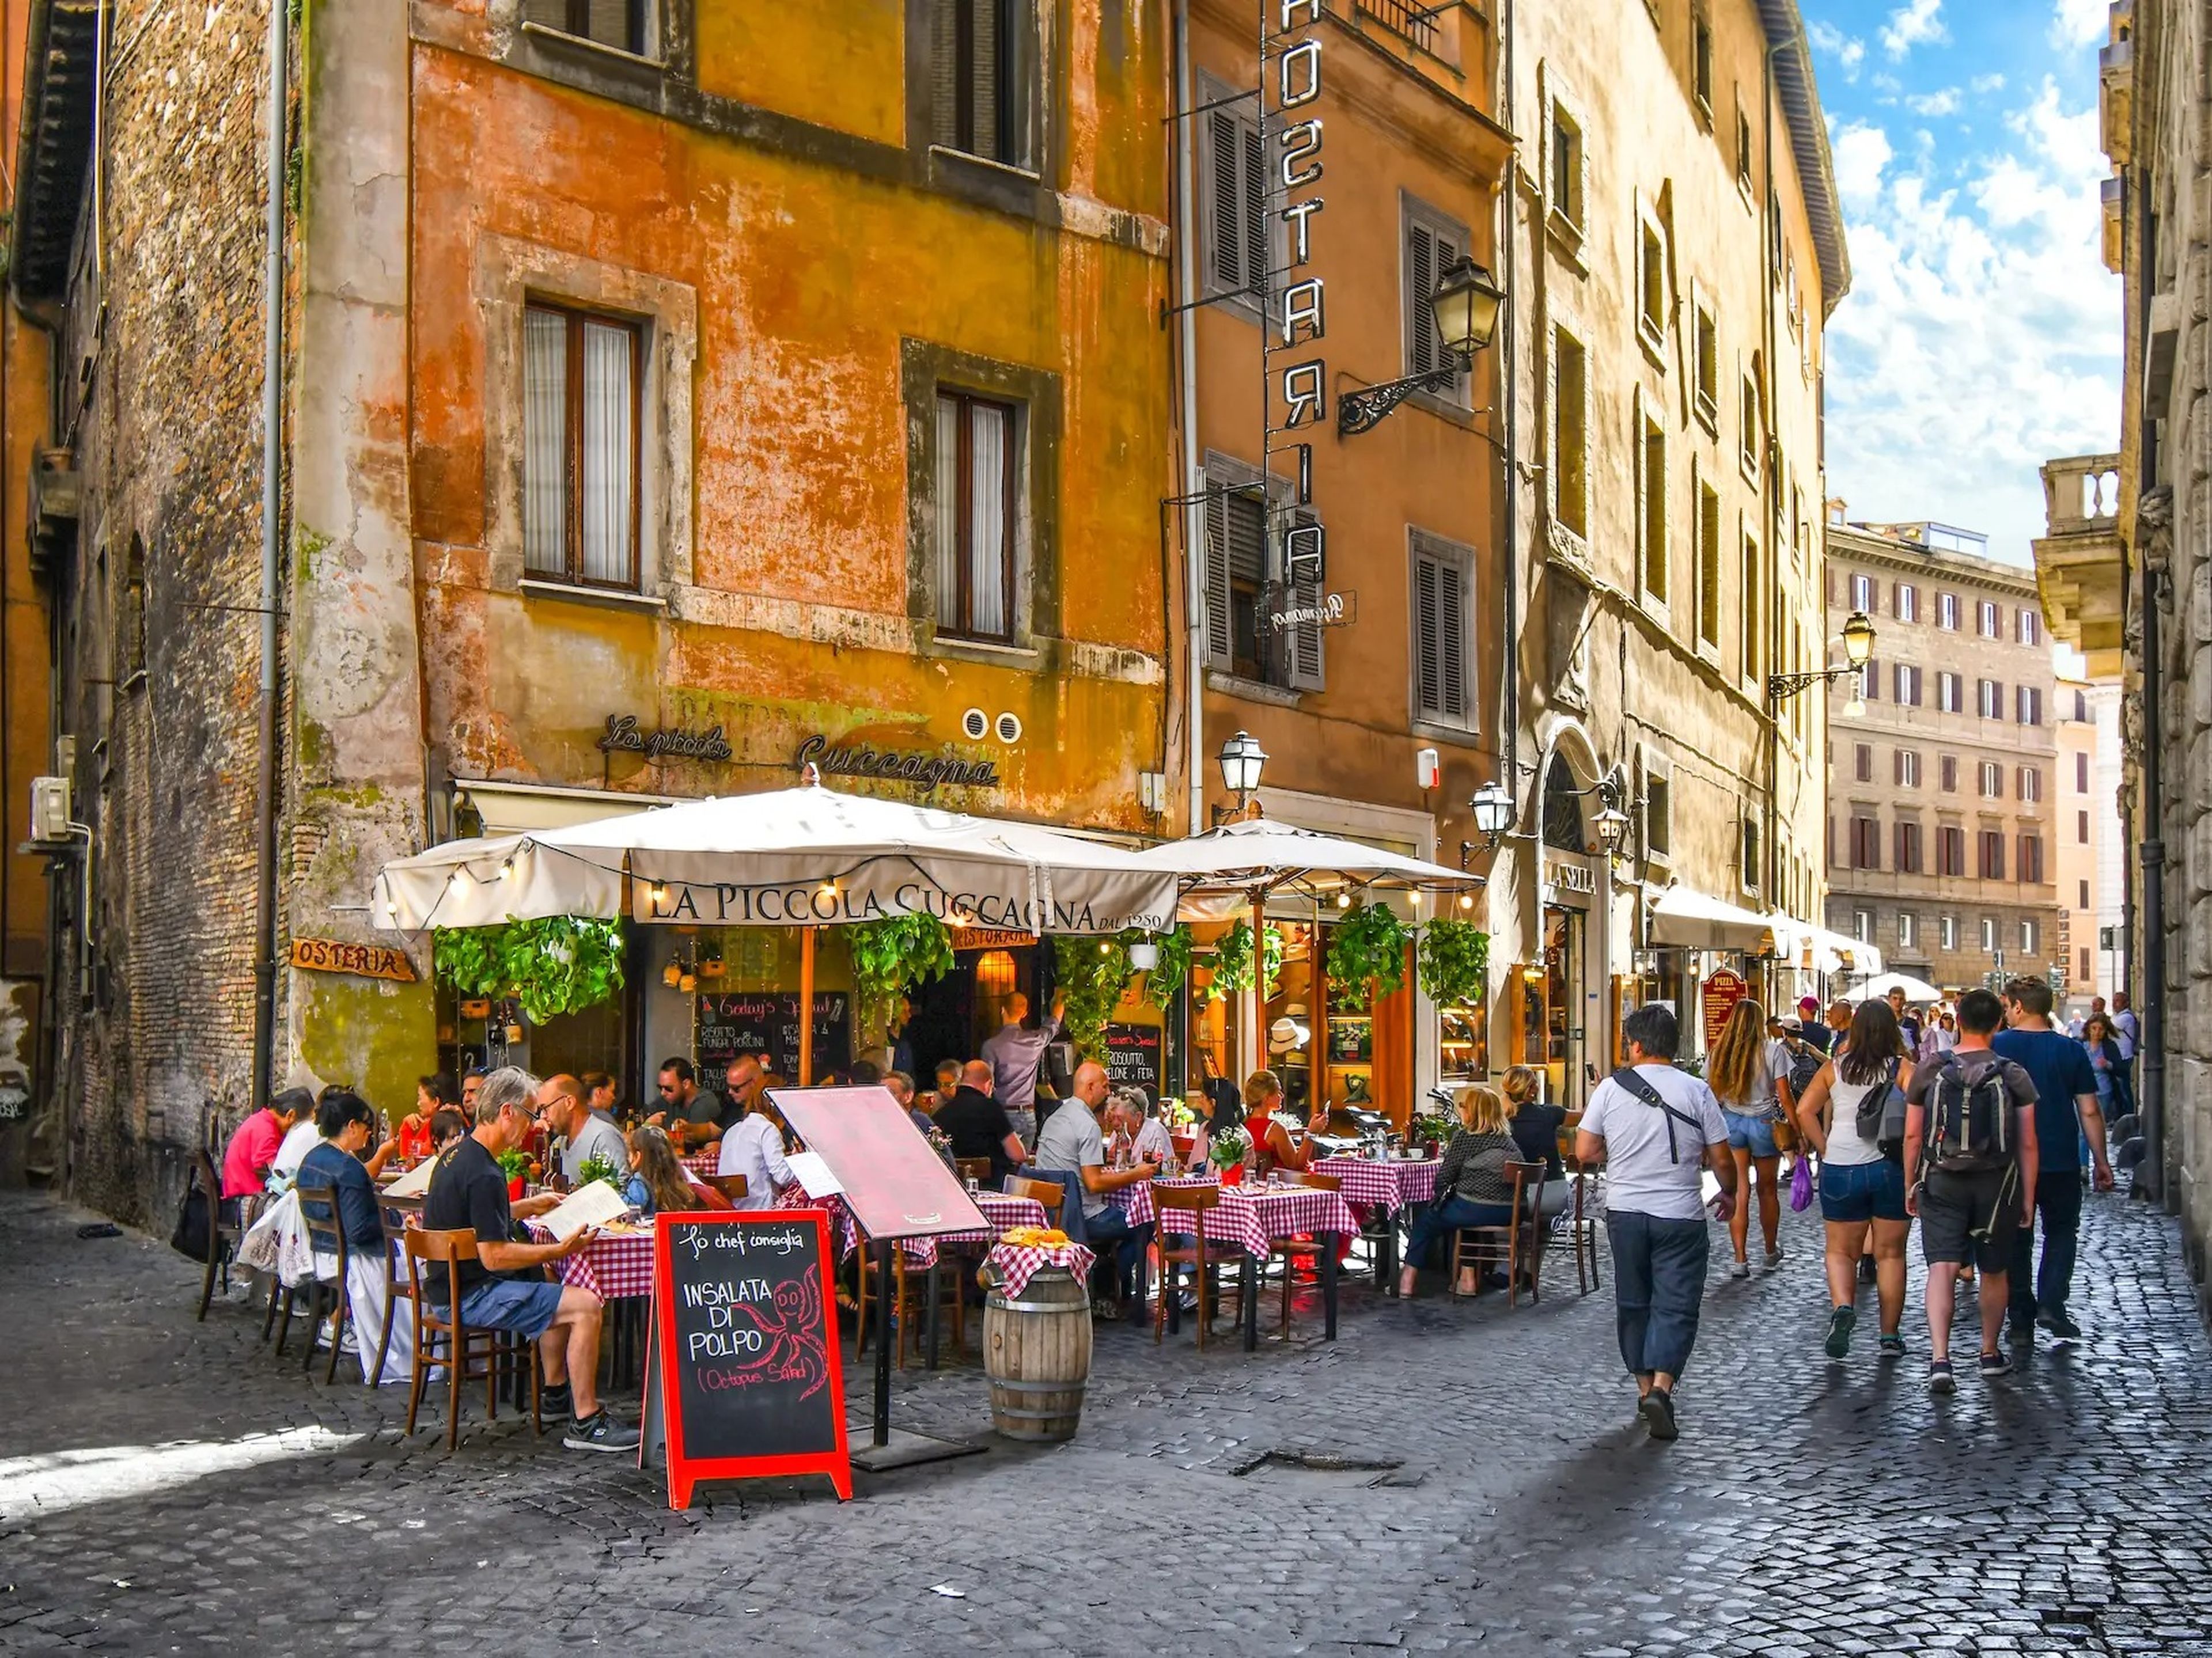 people dining outdoors at an italian restaurant in rome while others pass by on the cobblestone street